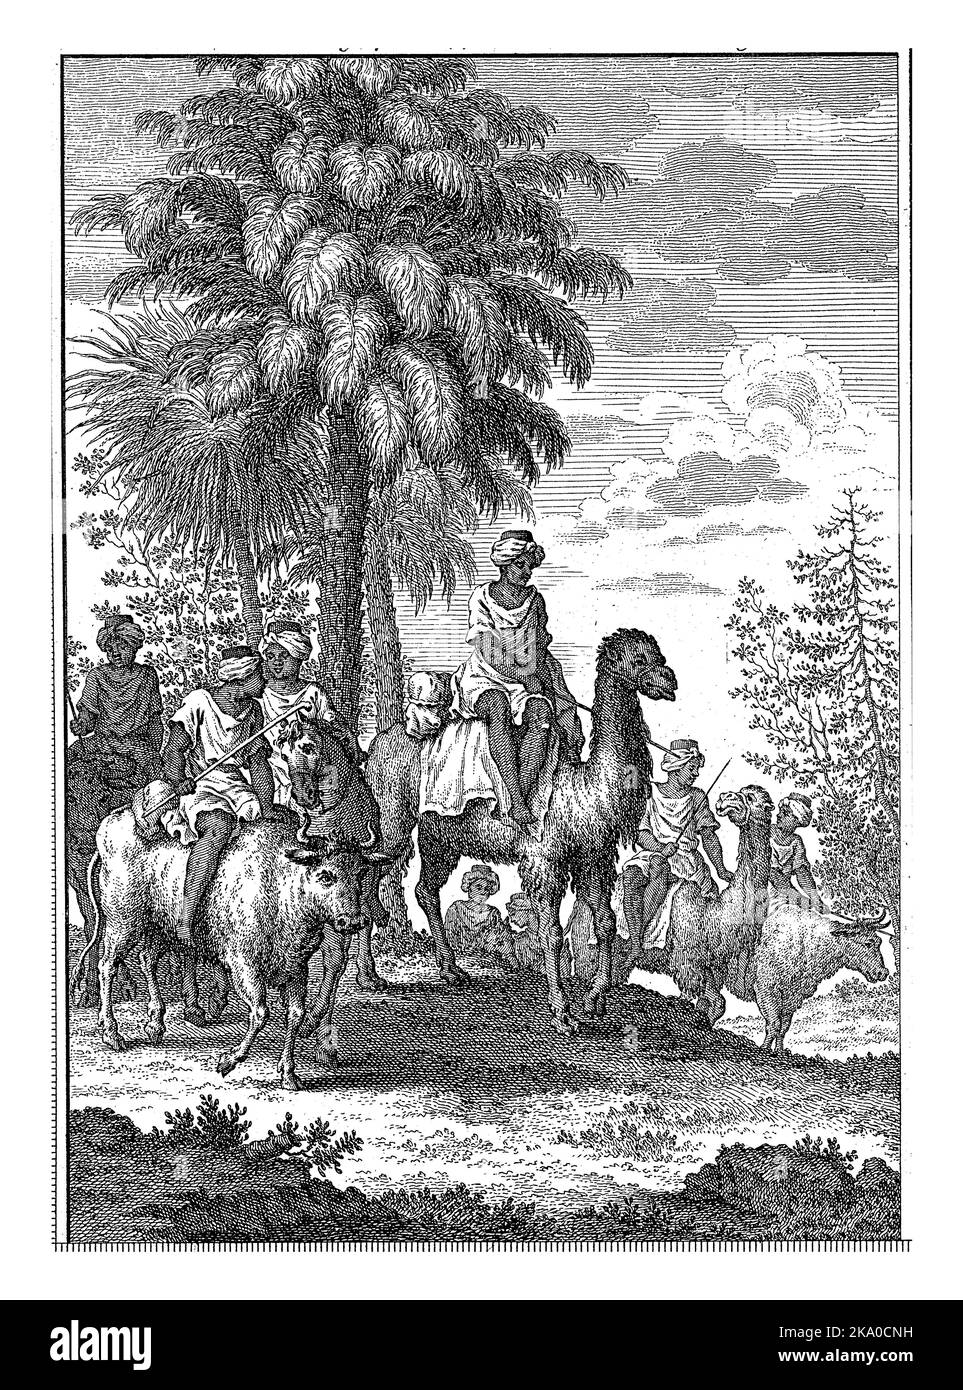 Men with turbans on their heads bring gum in leather bags to Senegal. They ride through a landscape with palm trees, on camels, oxen and horses. Stock Photo